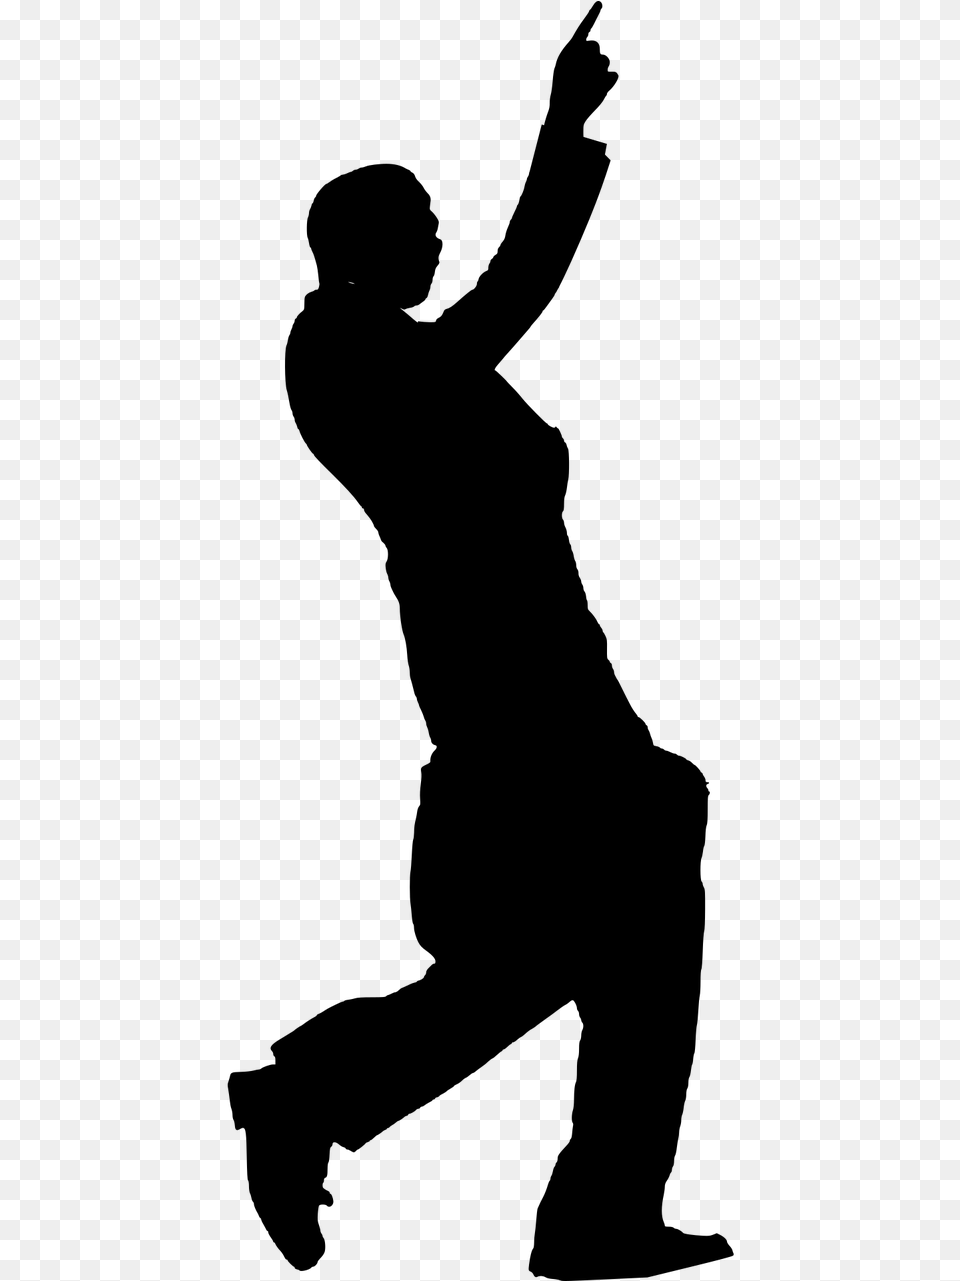 Silhouette Man Arms Outstretched Photo Silhouette, Gray Free Png